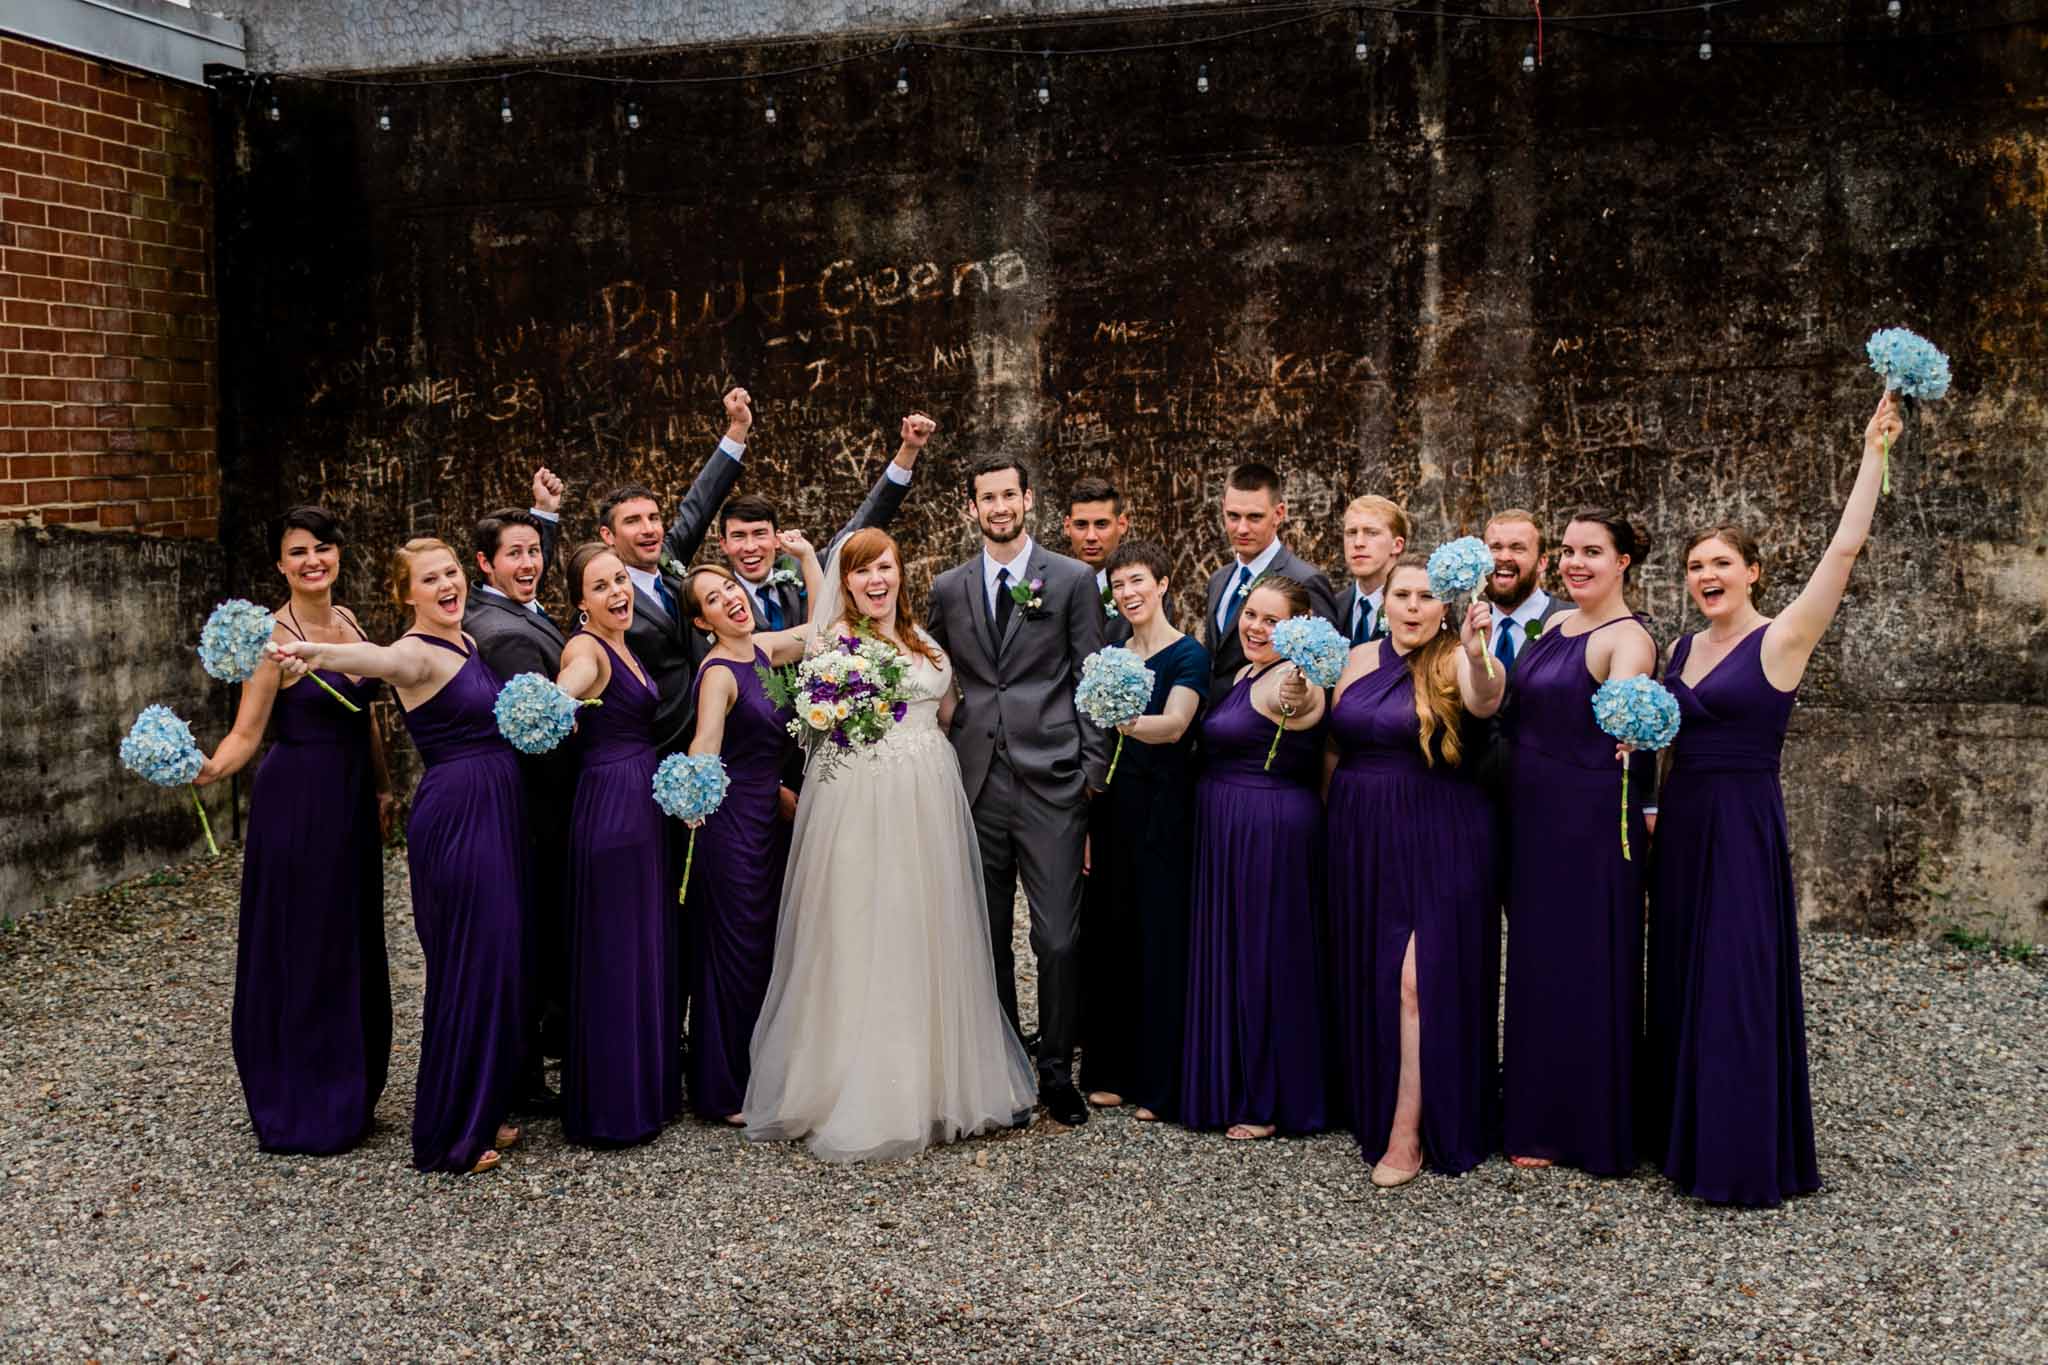 Haw River Ballroom Wedding | Durham Photographer | By G. Lin Photography | Wedding party outside of amphitheater cheering